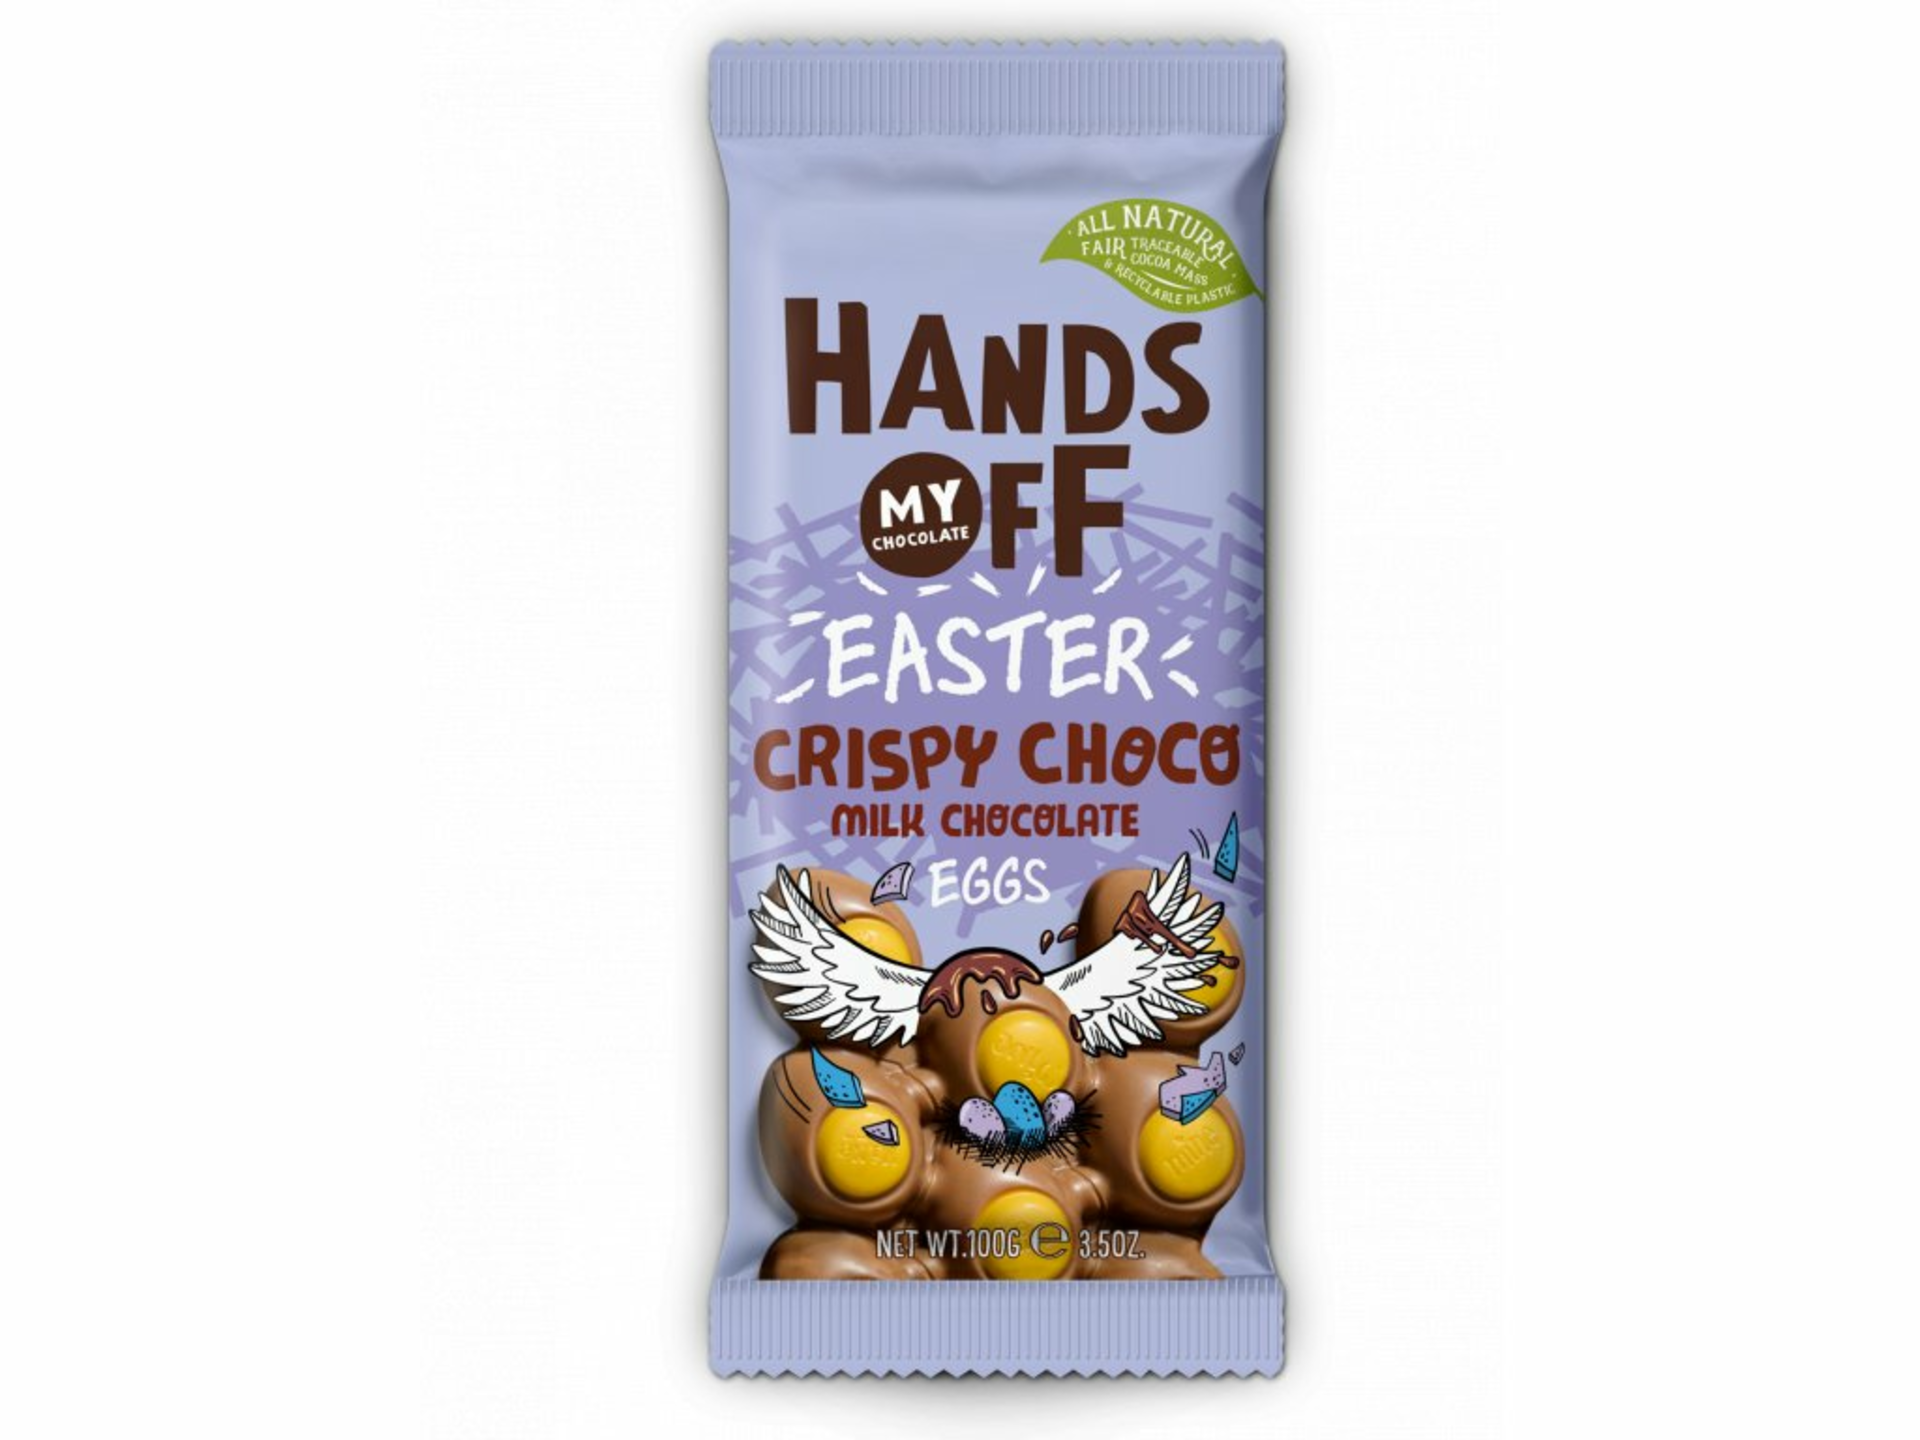 Hands off my chocolate The Egg Bar